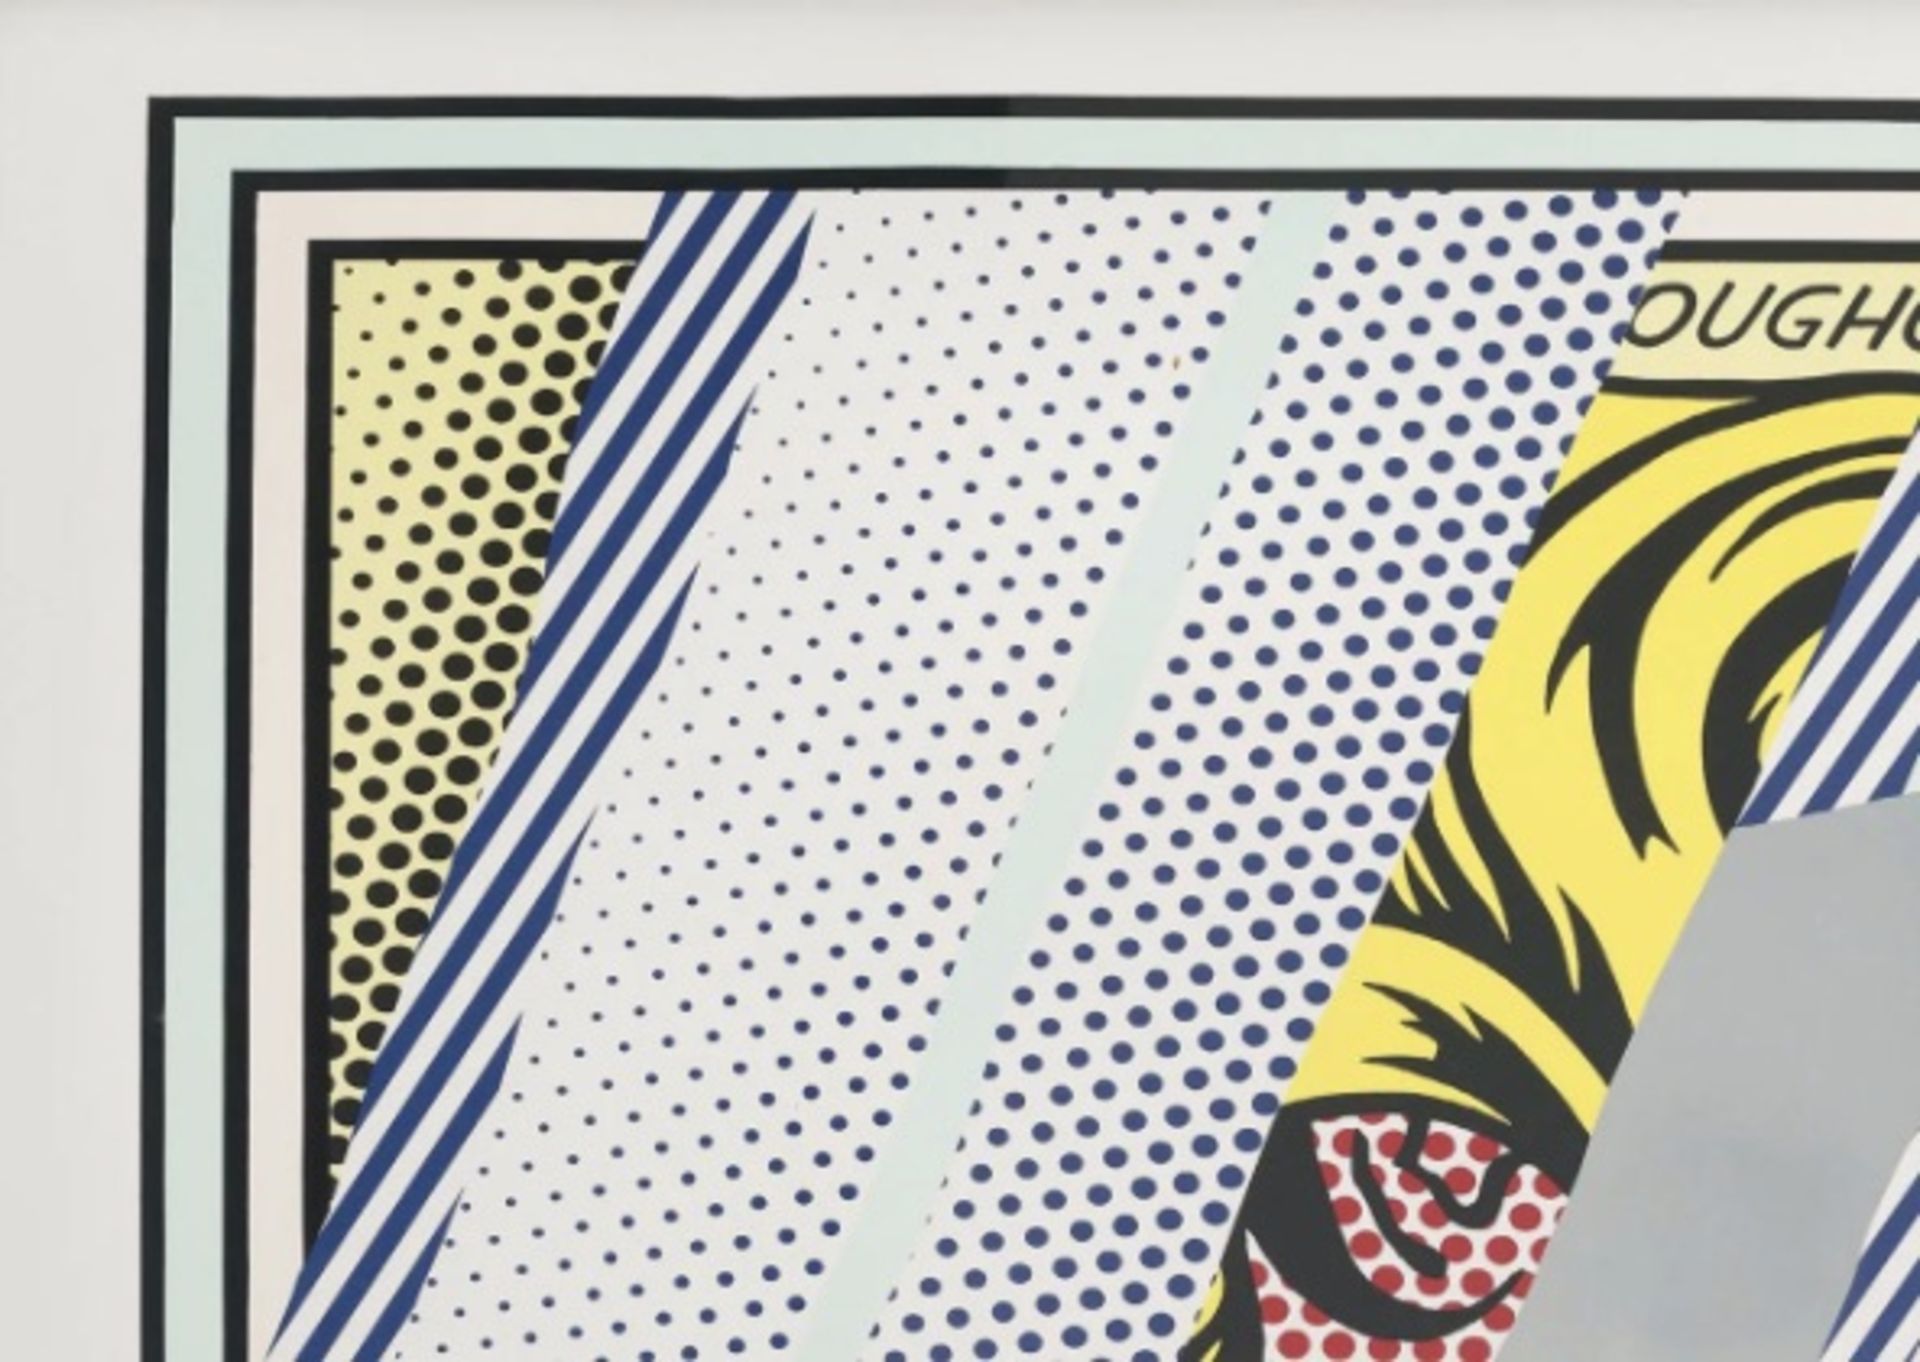 Roy Lichtenstein "Reflections on Girl, 1990" Plate Signed Offset Lithograph - Image 3 of 5